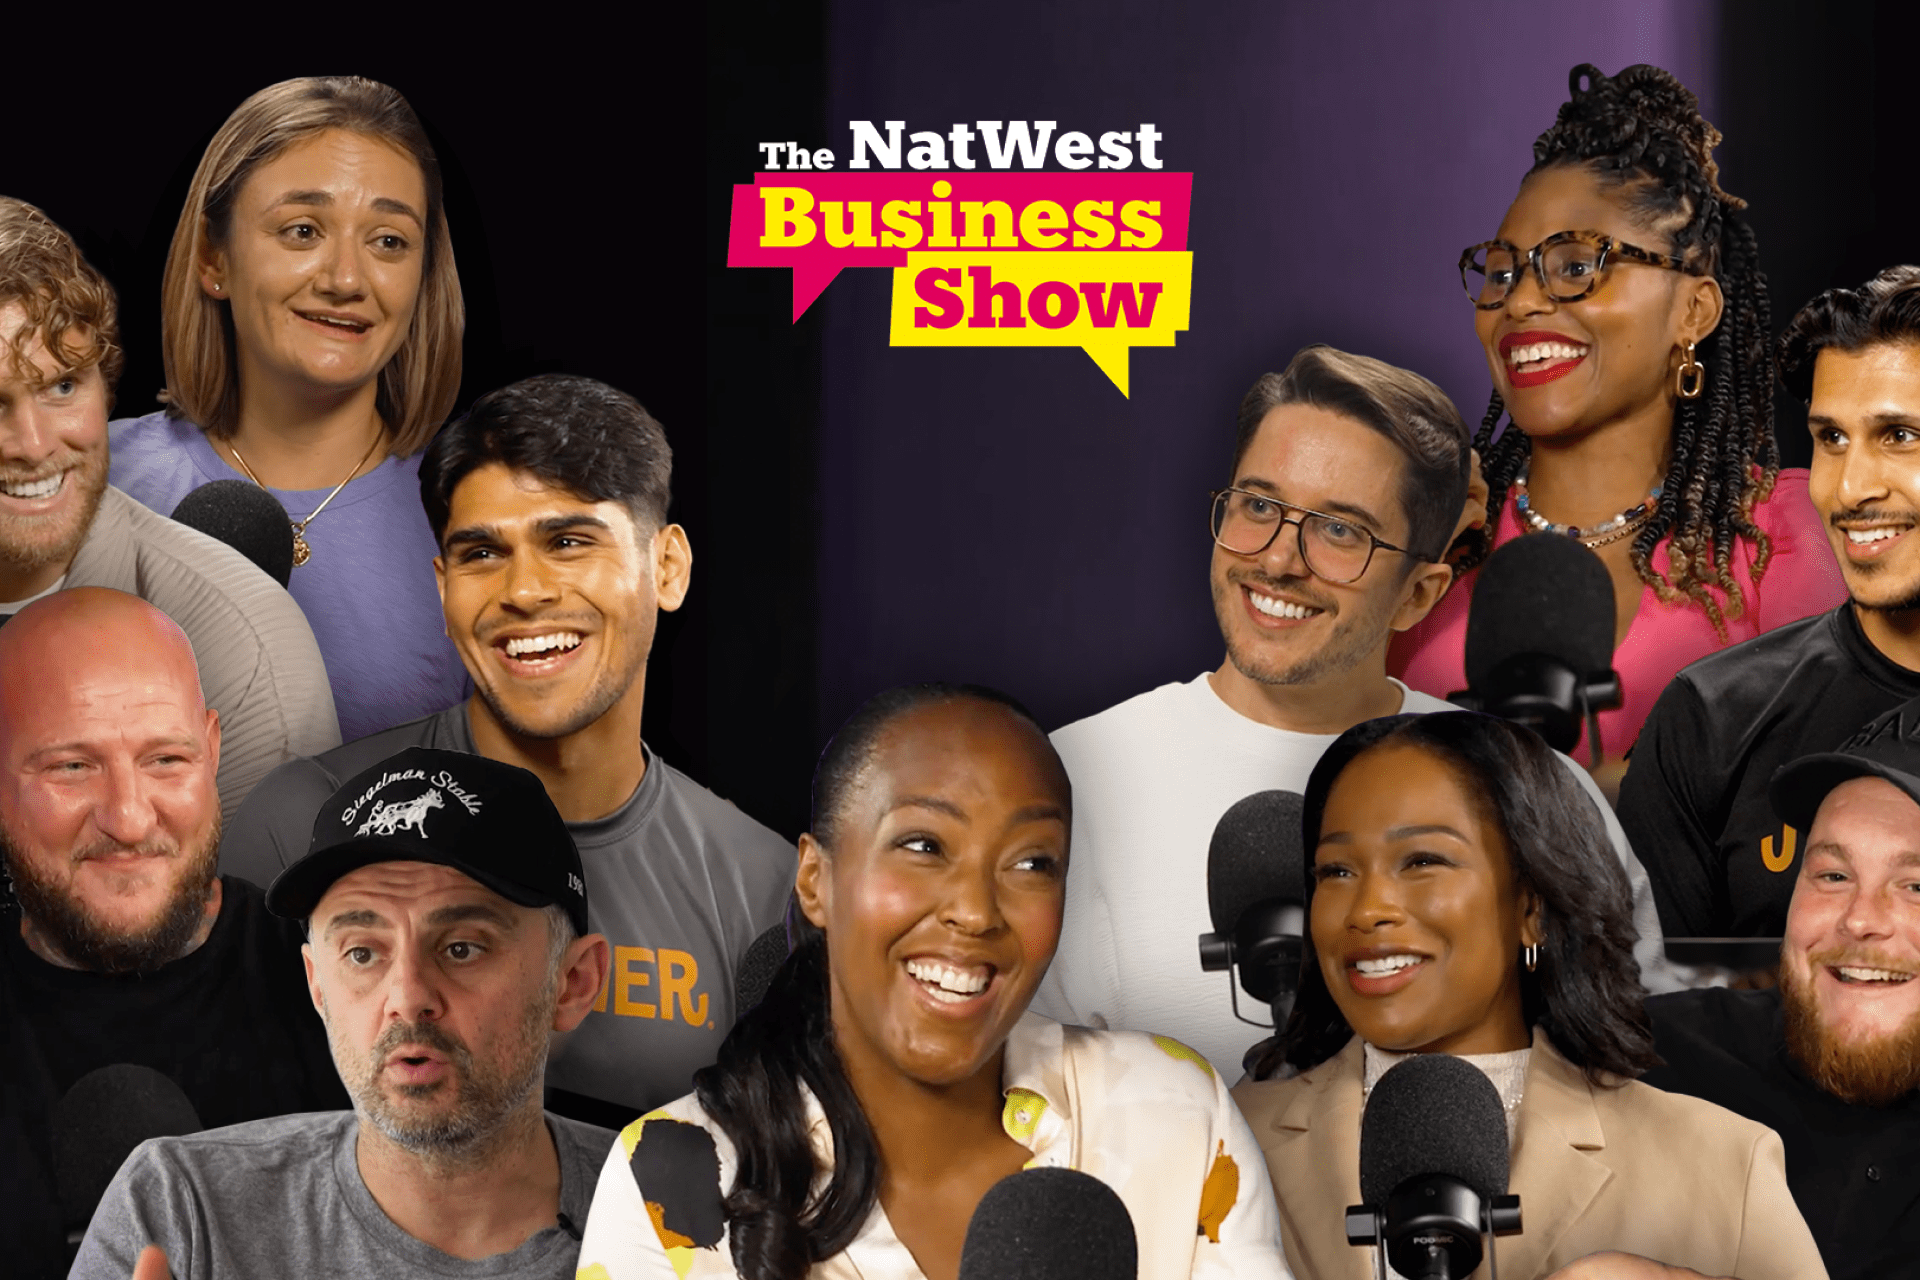 NatWest: The Business Show